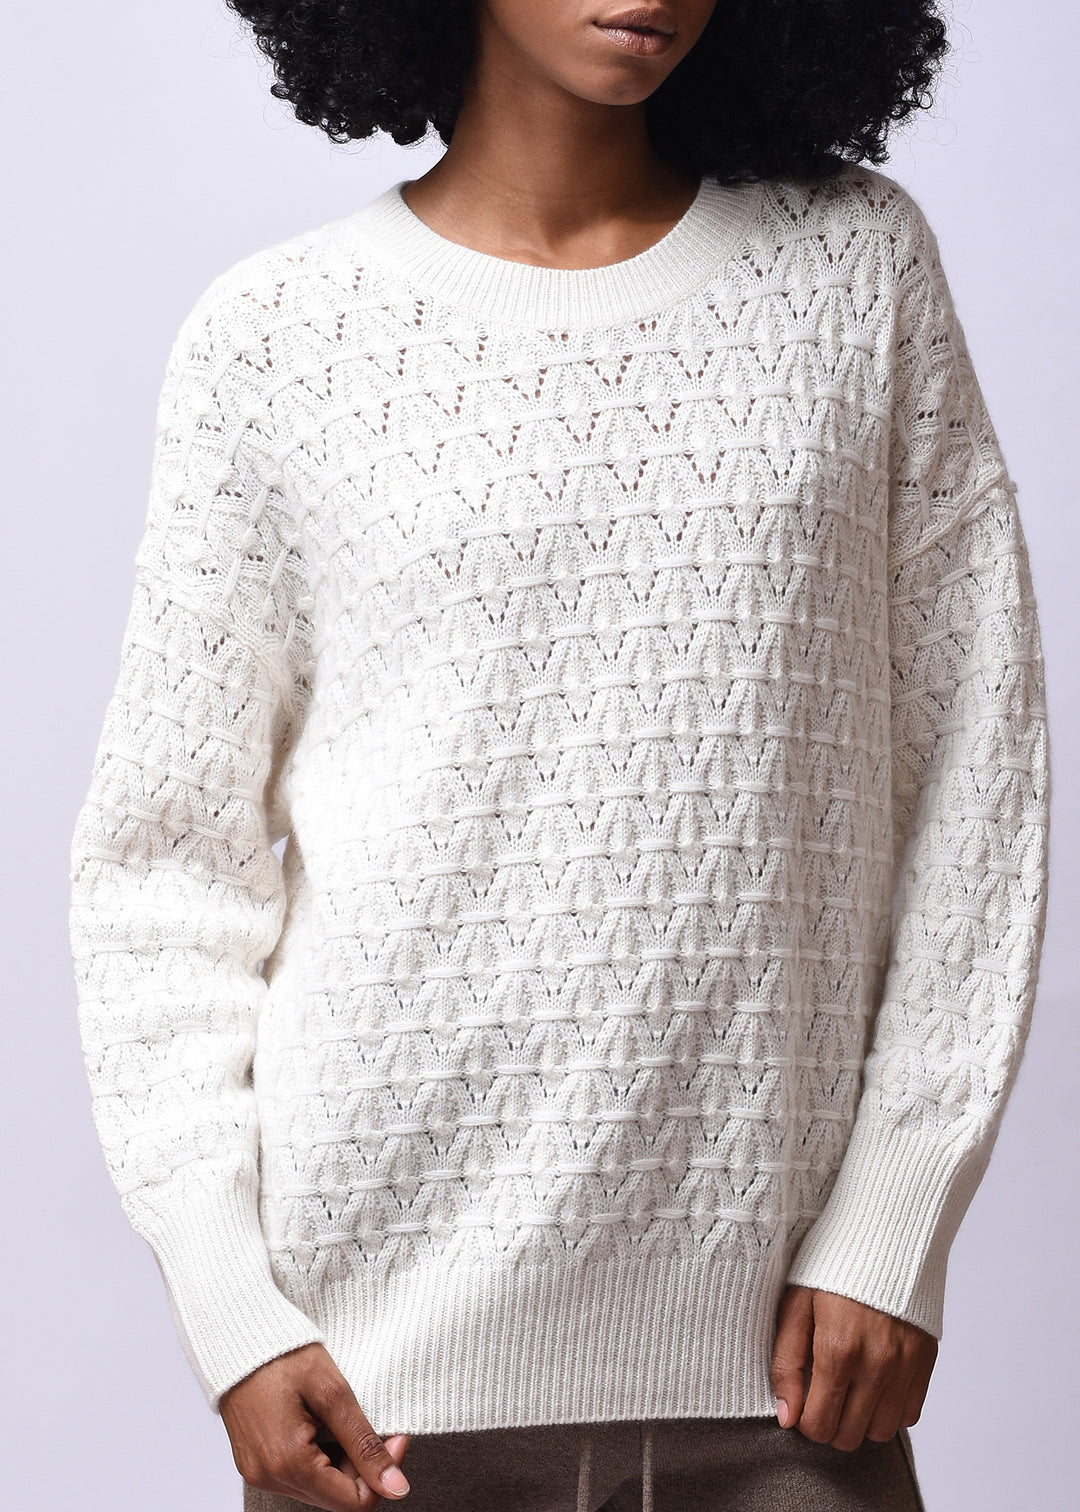 Round Neck Cable Knit Cashmere Pullover